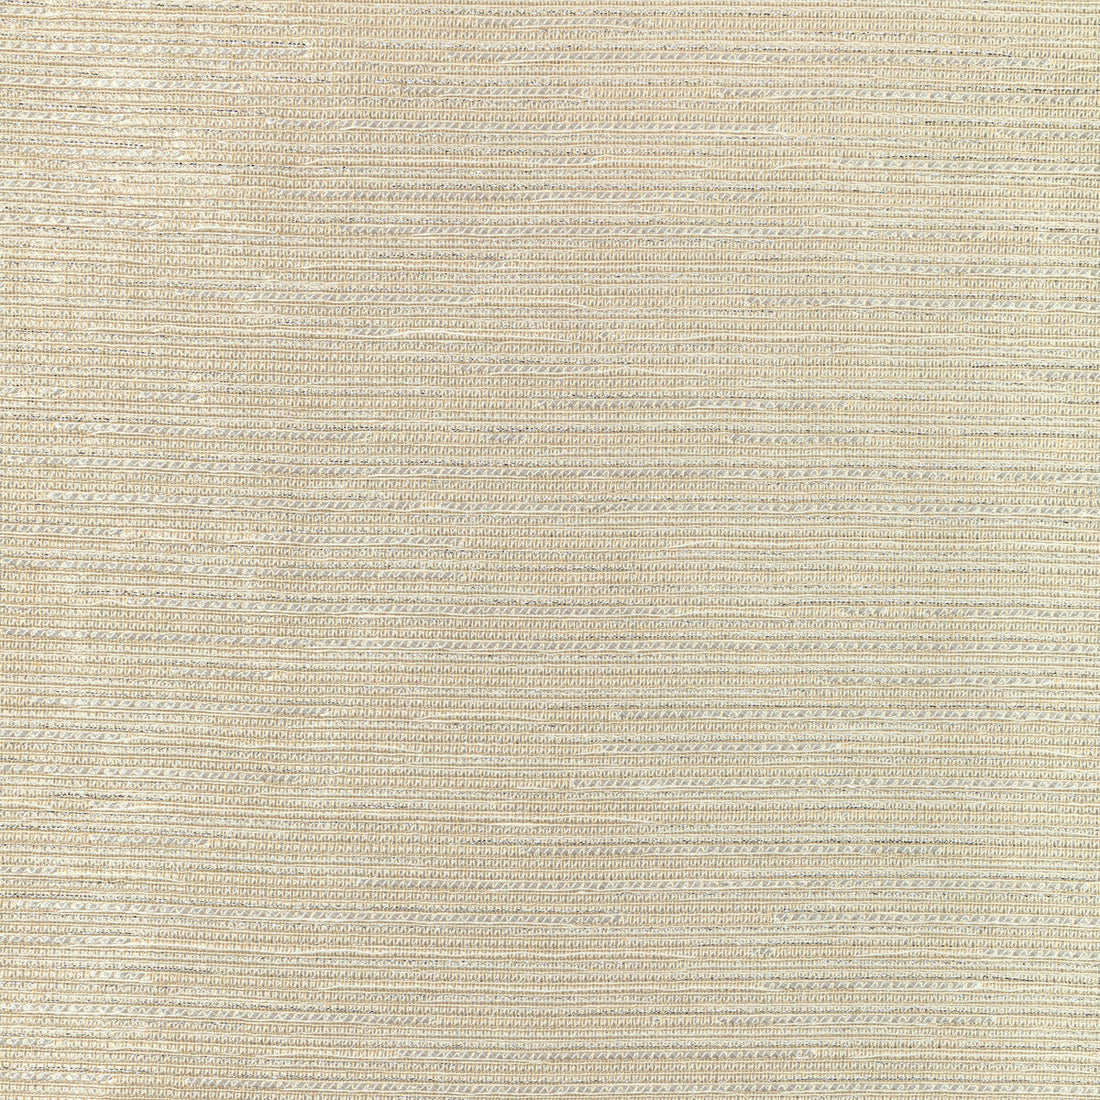 Shimmer Way fabric in gold color - pattern 4888.4.0 - by Kravet Couture in the Modern Luxe III collection